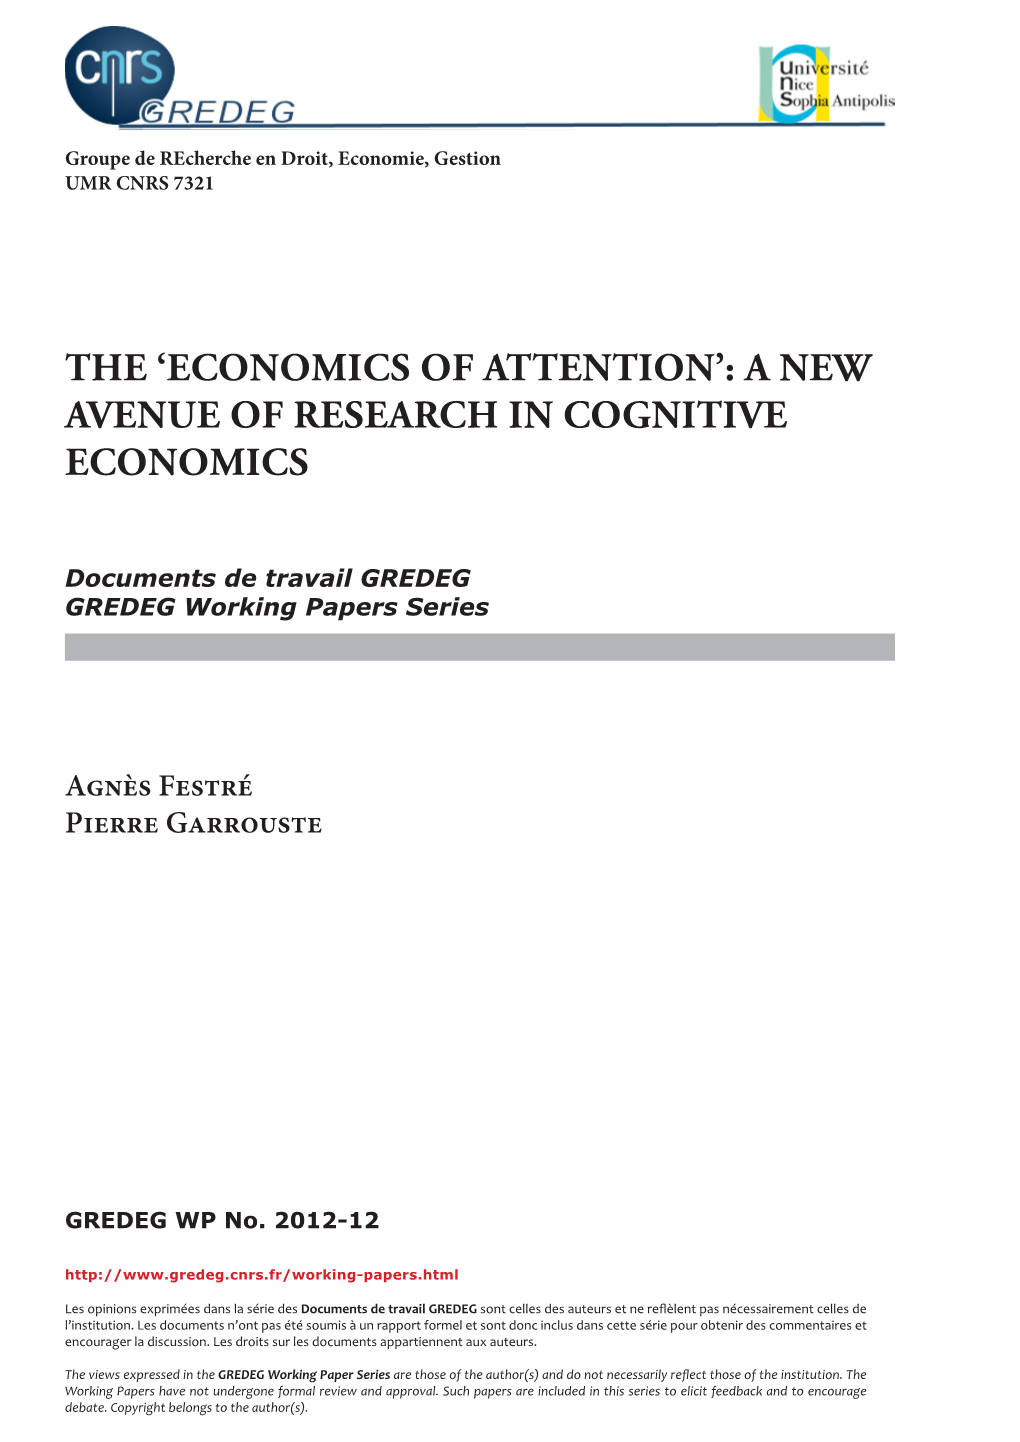 A New Avenue of Research in Cognitive Economics